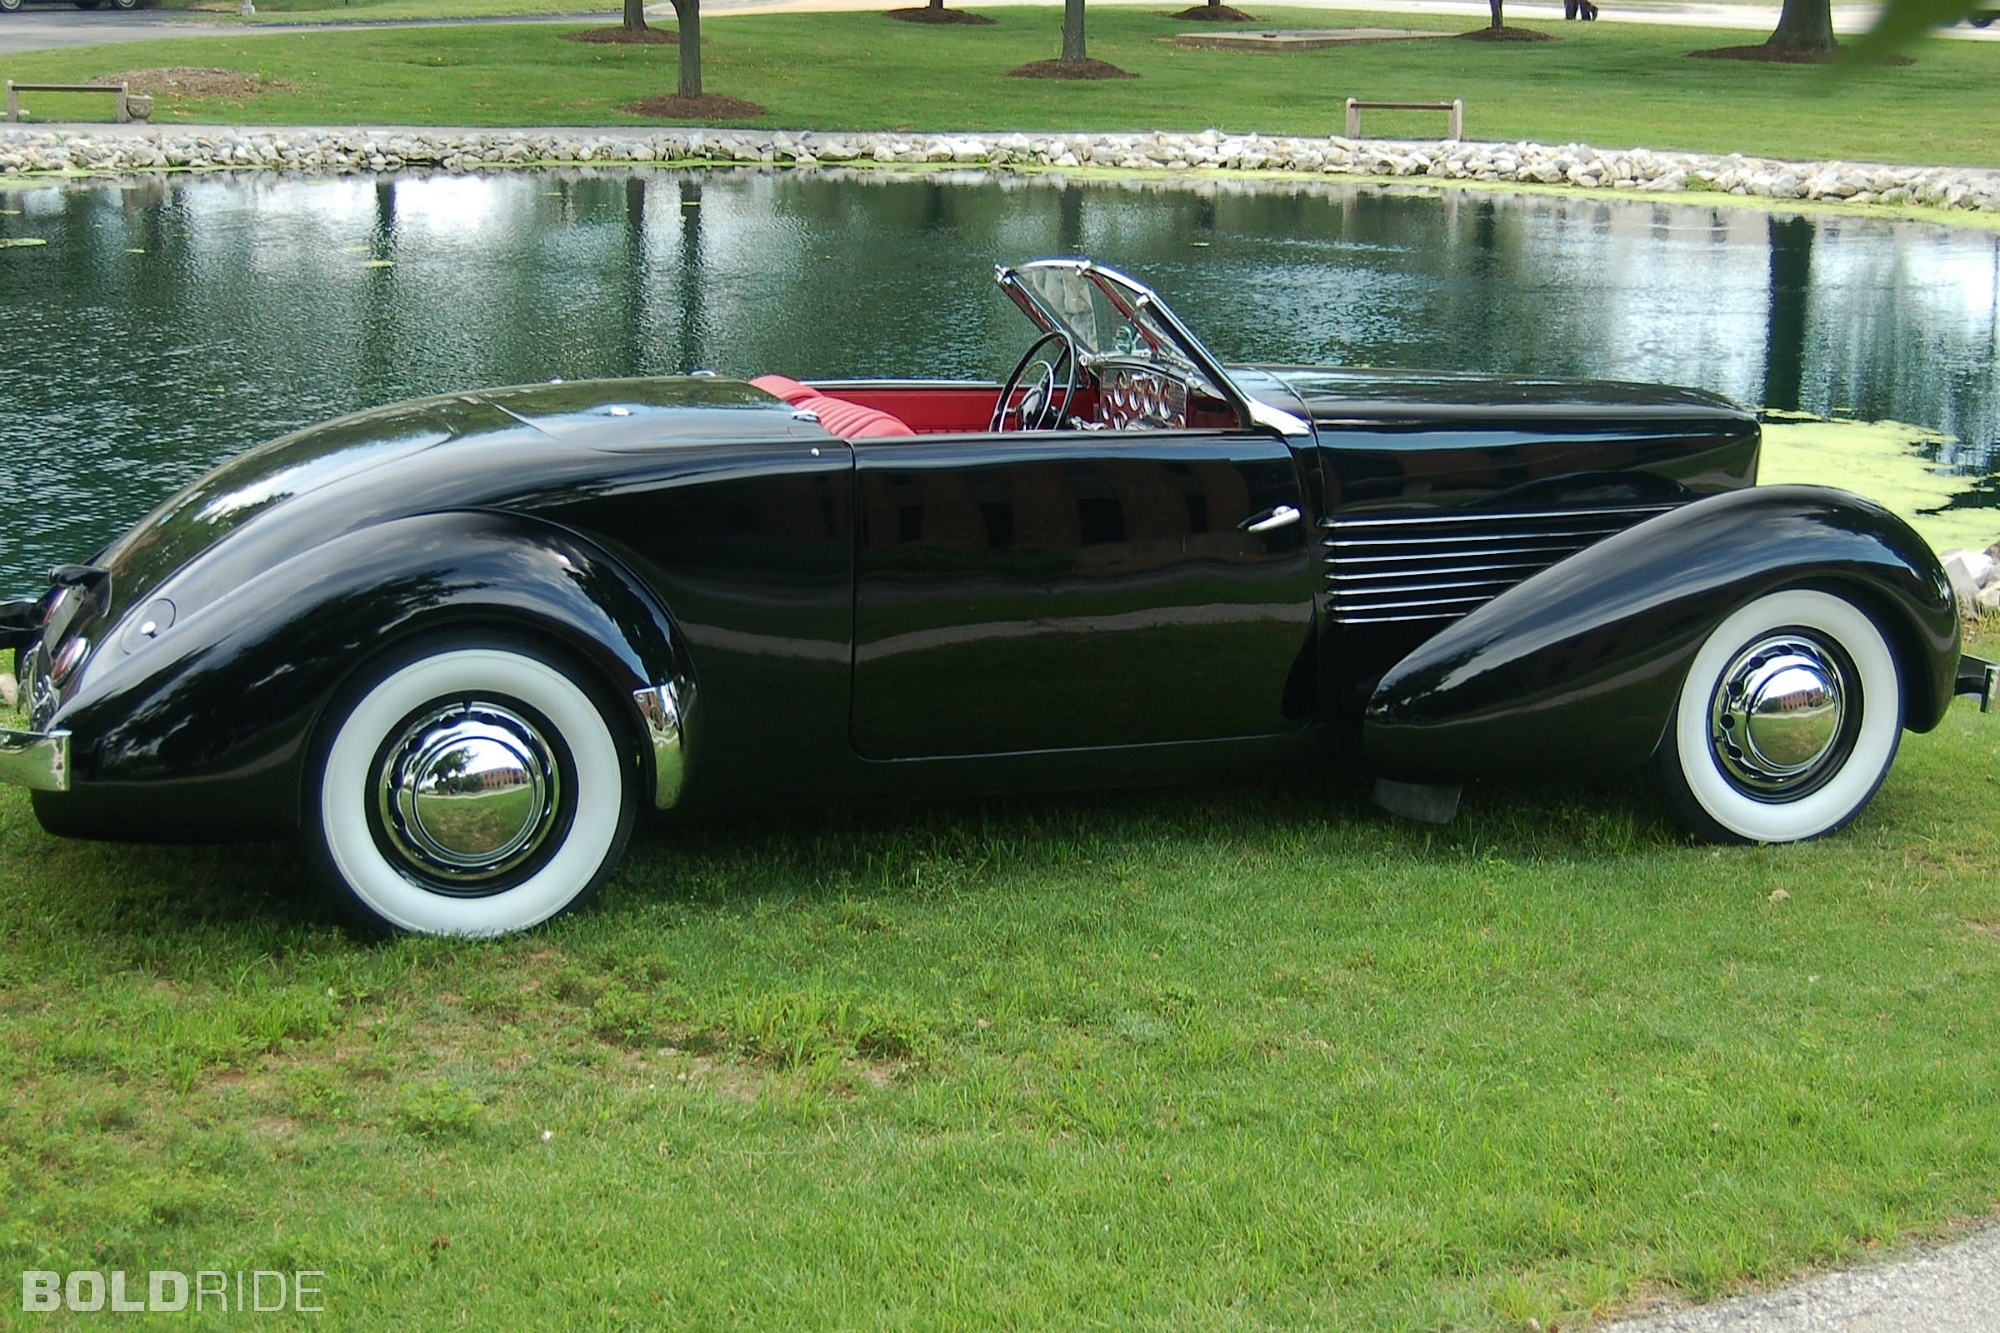 1936 Cord 810 Convertible Coupe Boldride.com - Pictures, Wallpapers